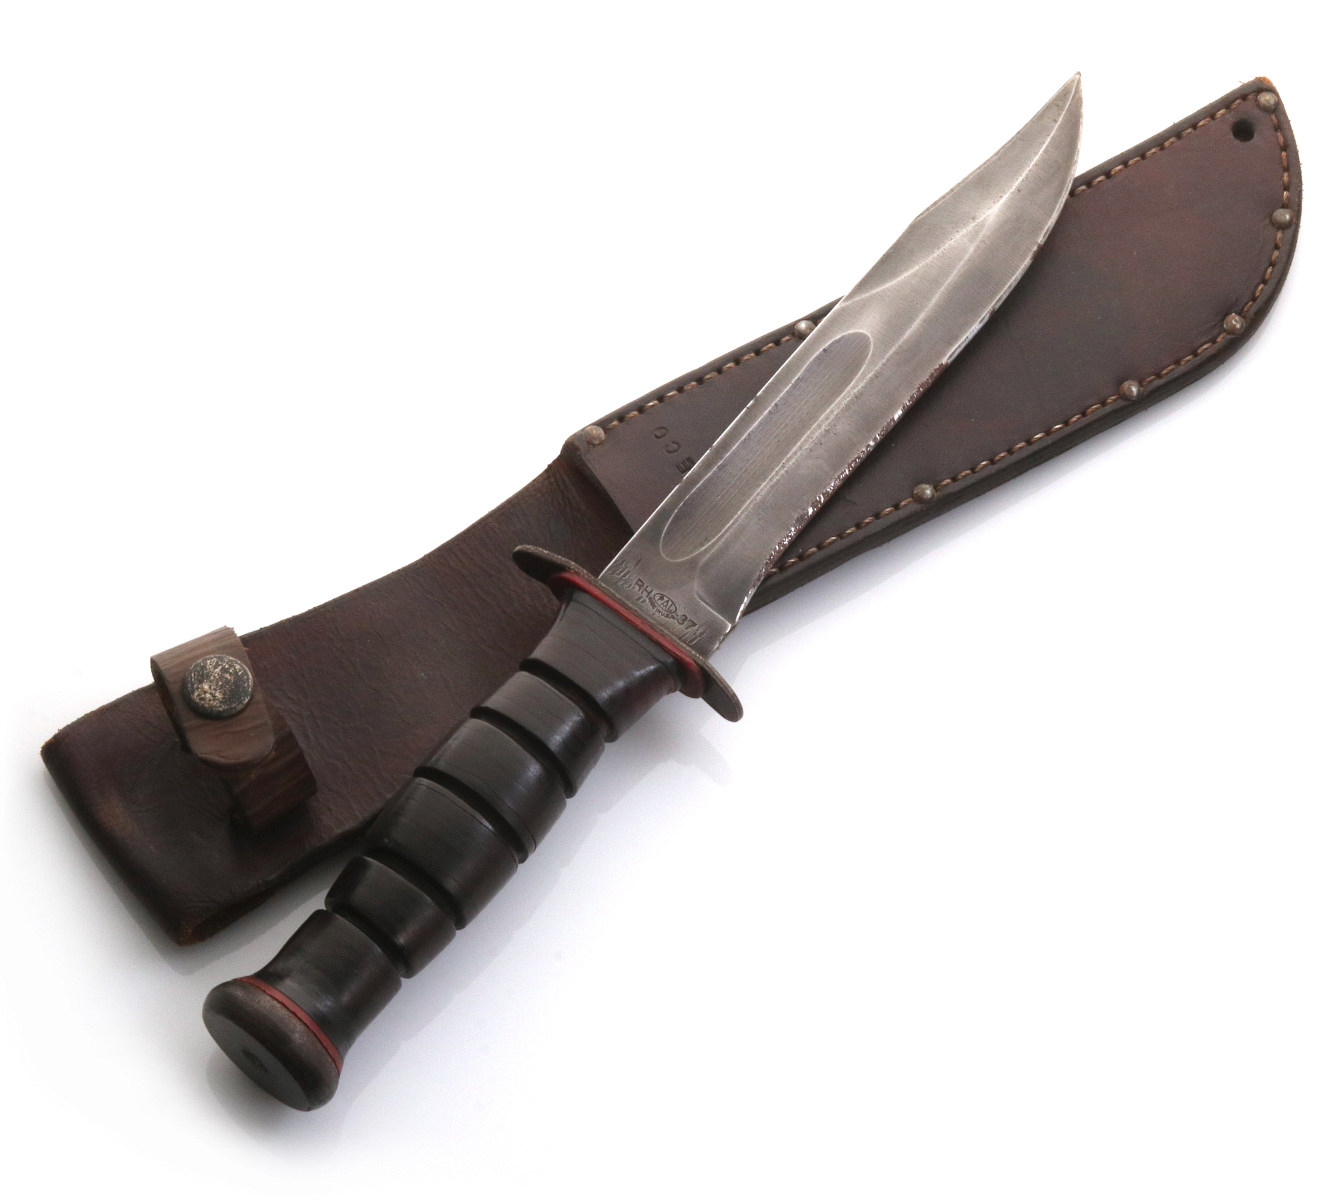 TWO US MILITARY FIGHTING KNIVES WITH LEATHER SHEATHS